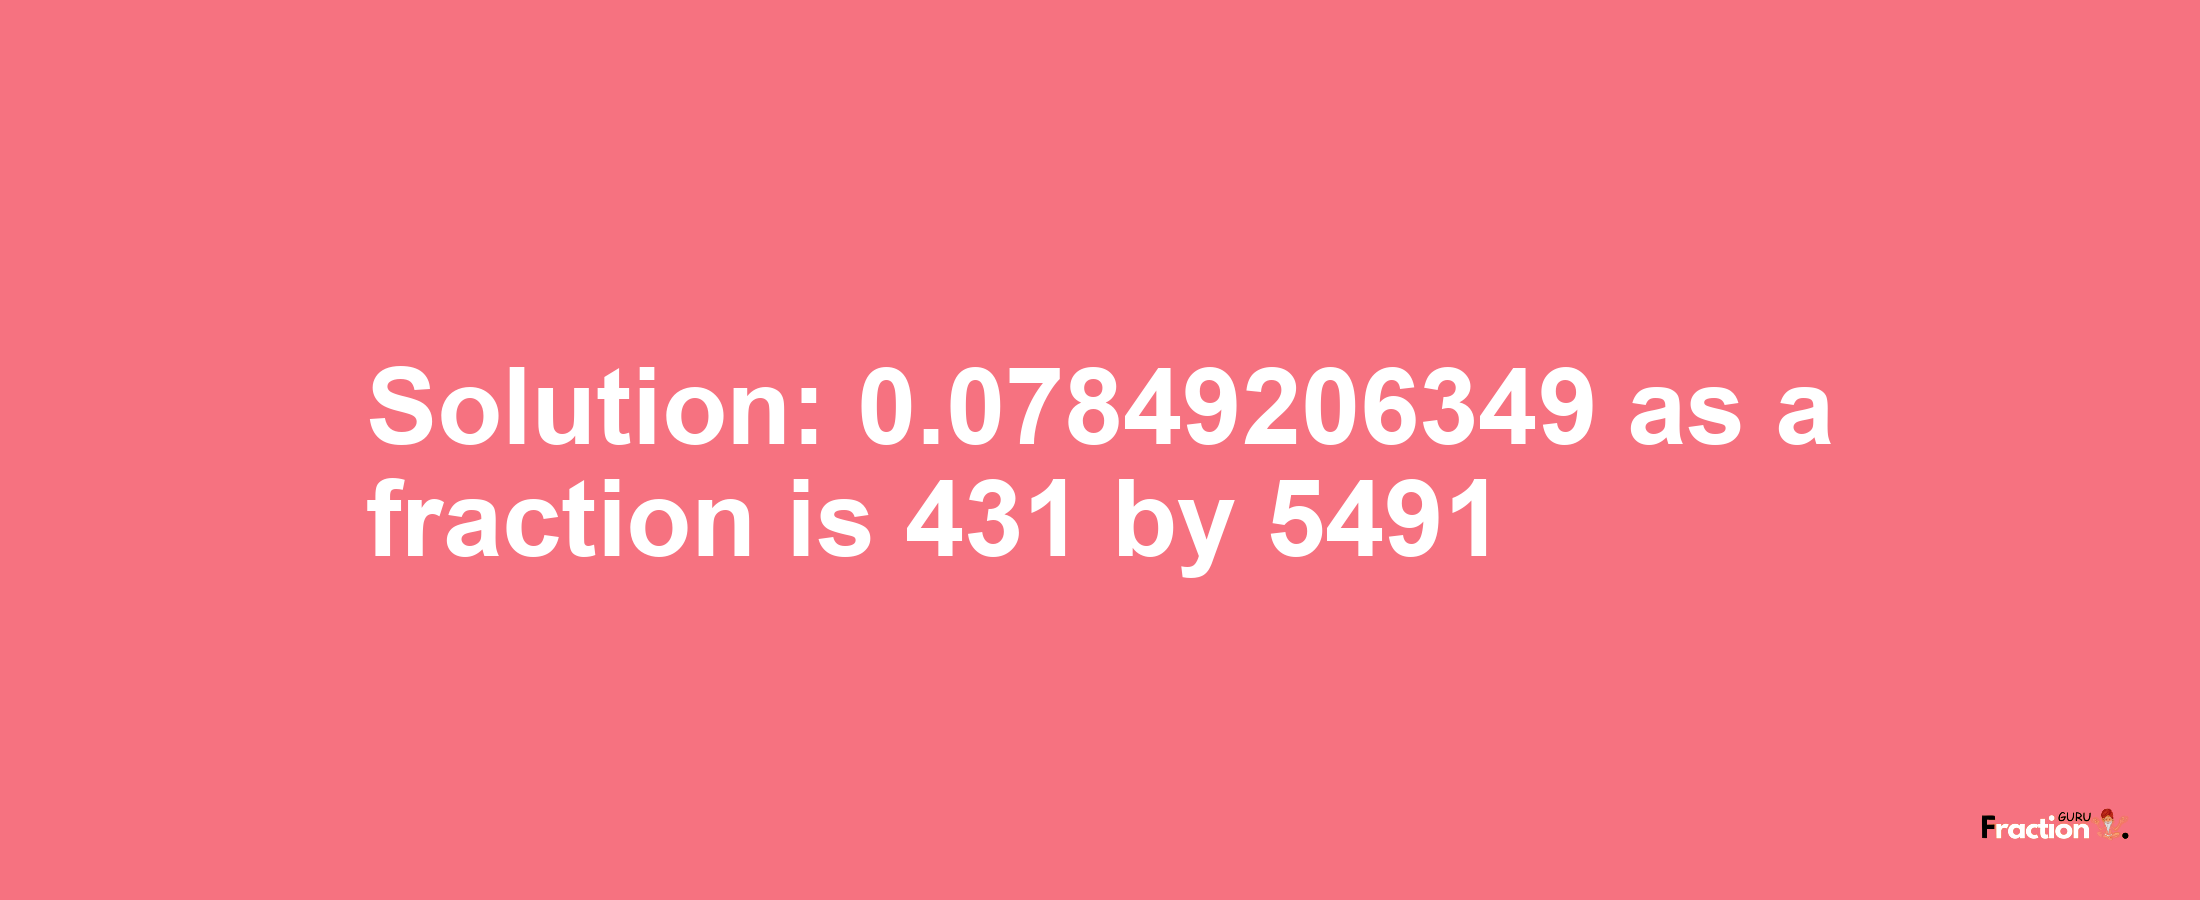 Solution:0.07849206349 as a fraction is 431/5491